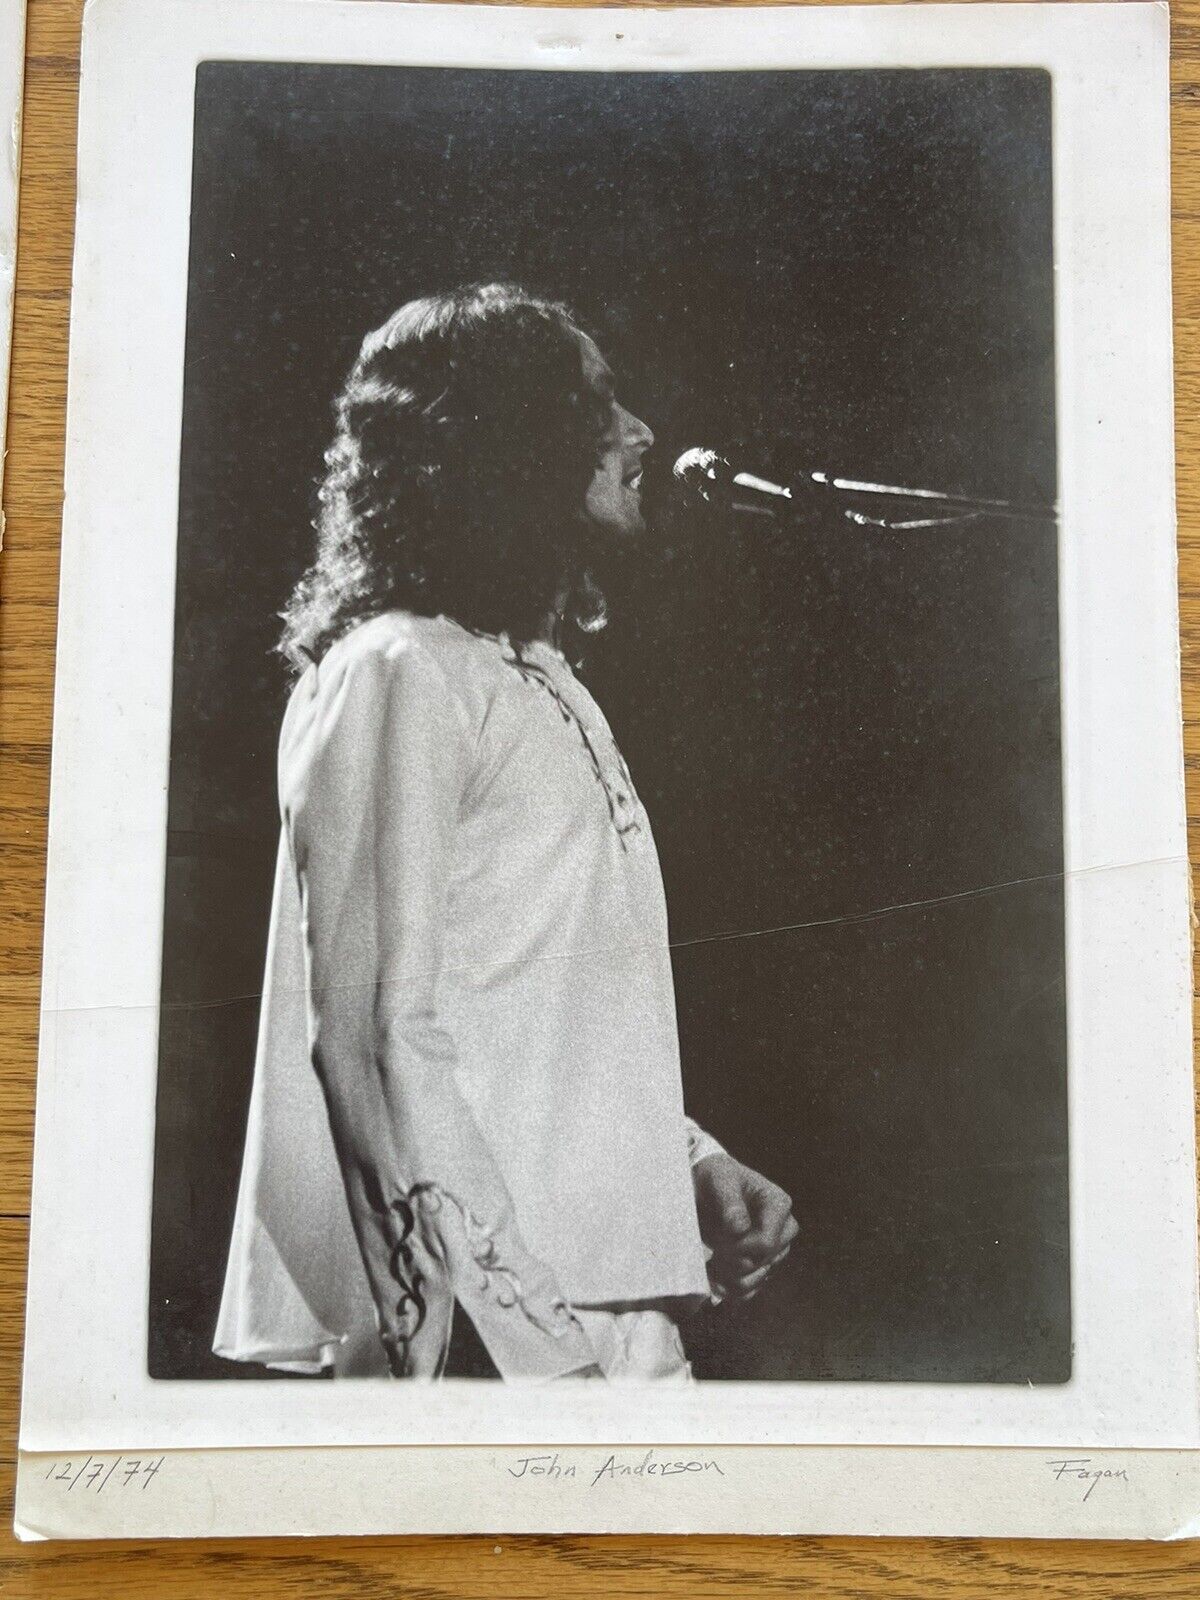 YES John Anderson Concert Photos 1974 Very rare 3 Total Band Photographs